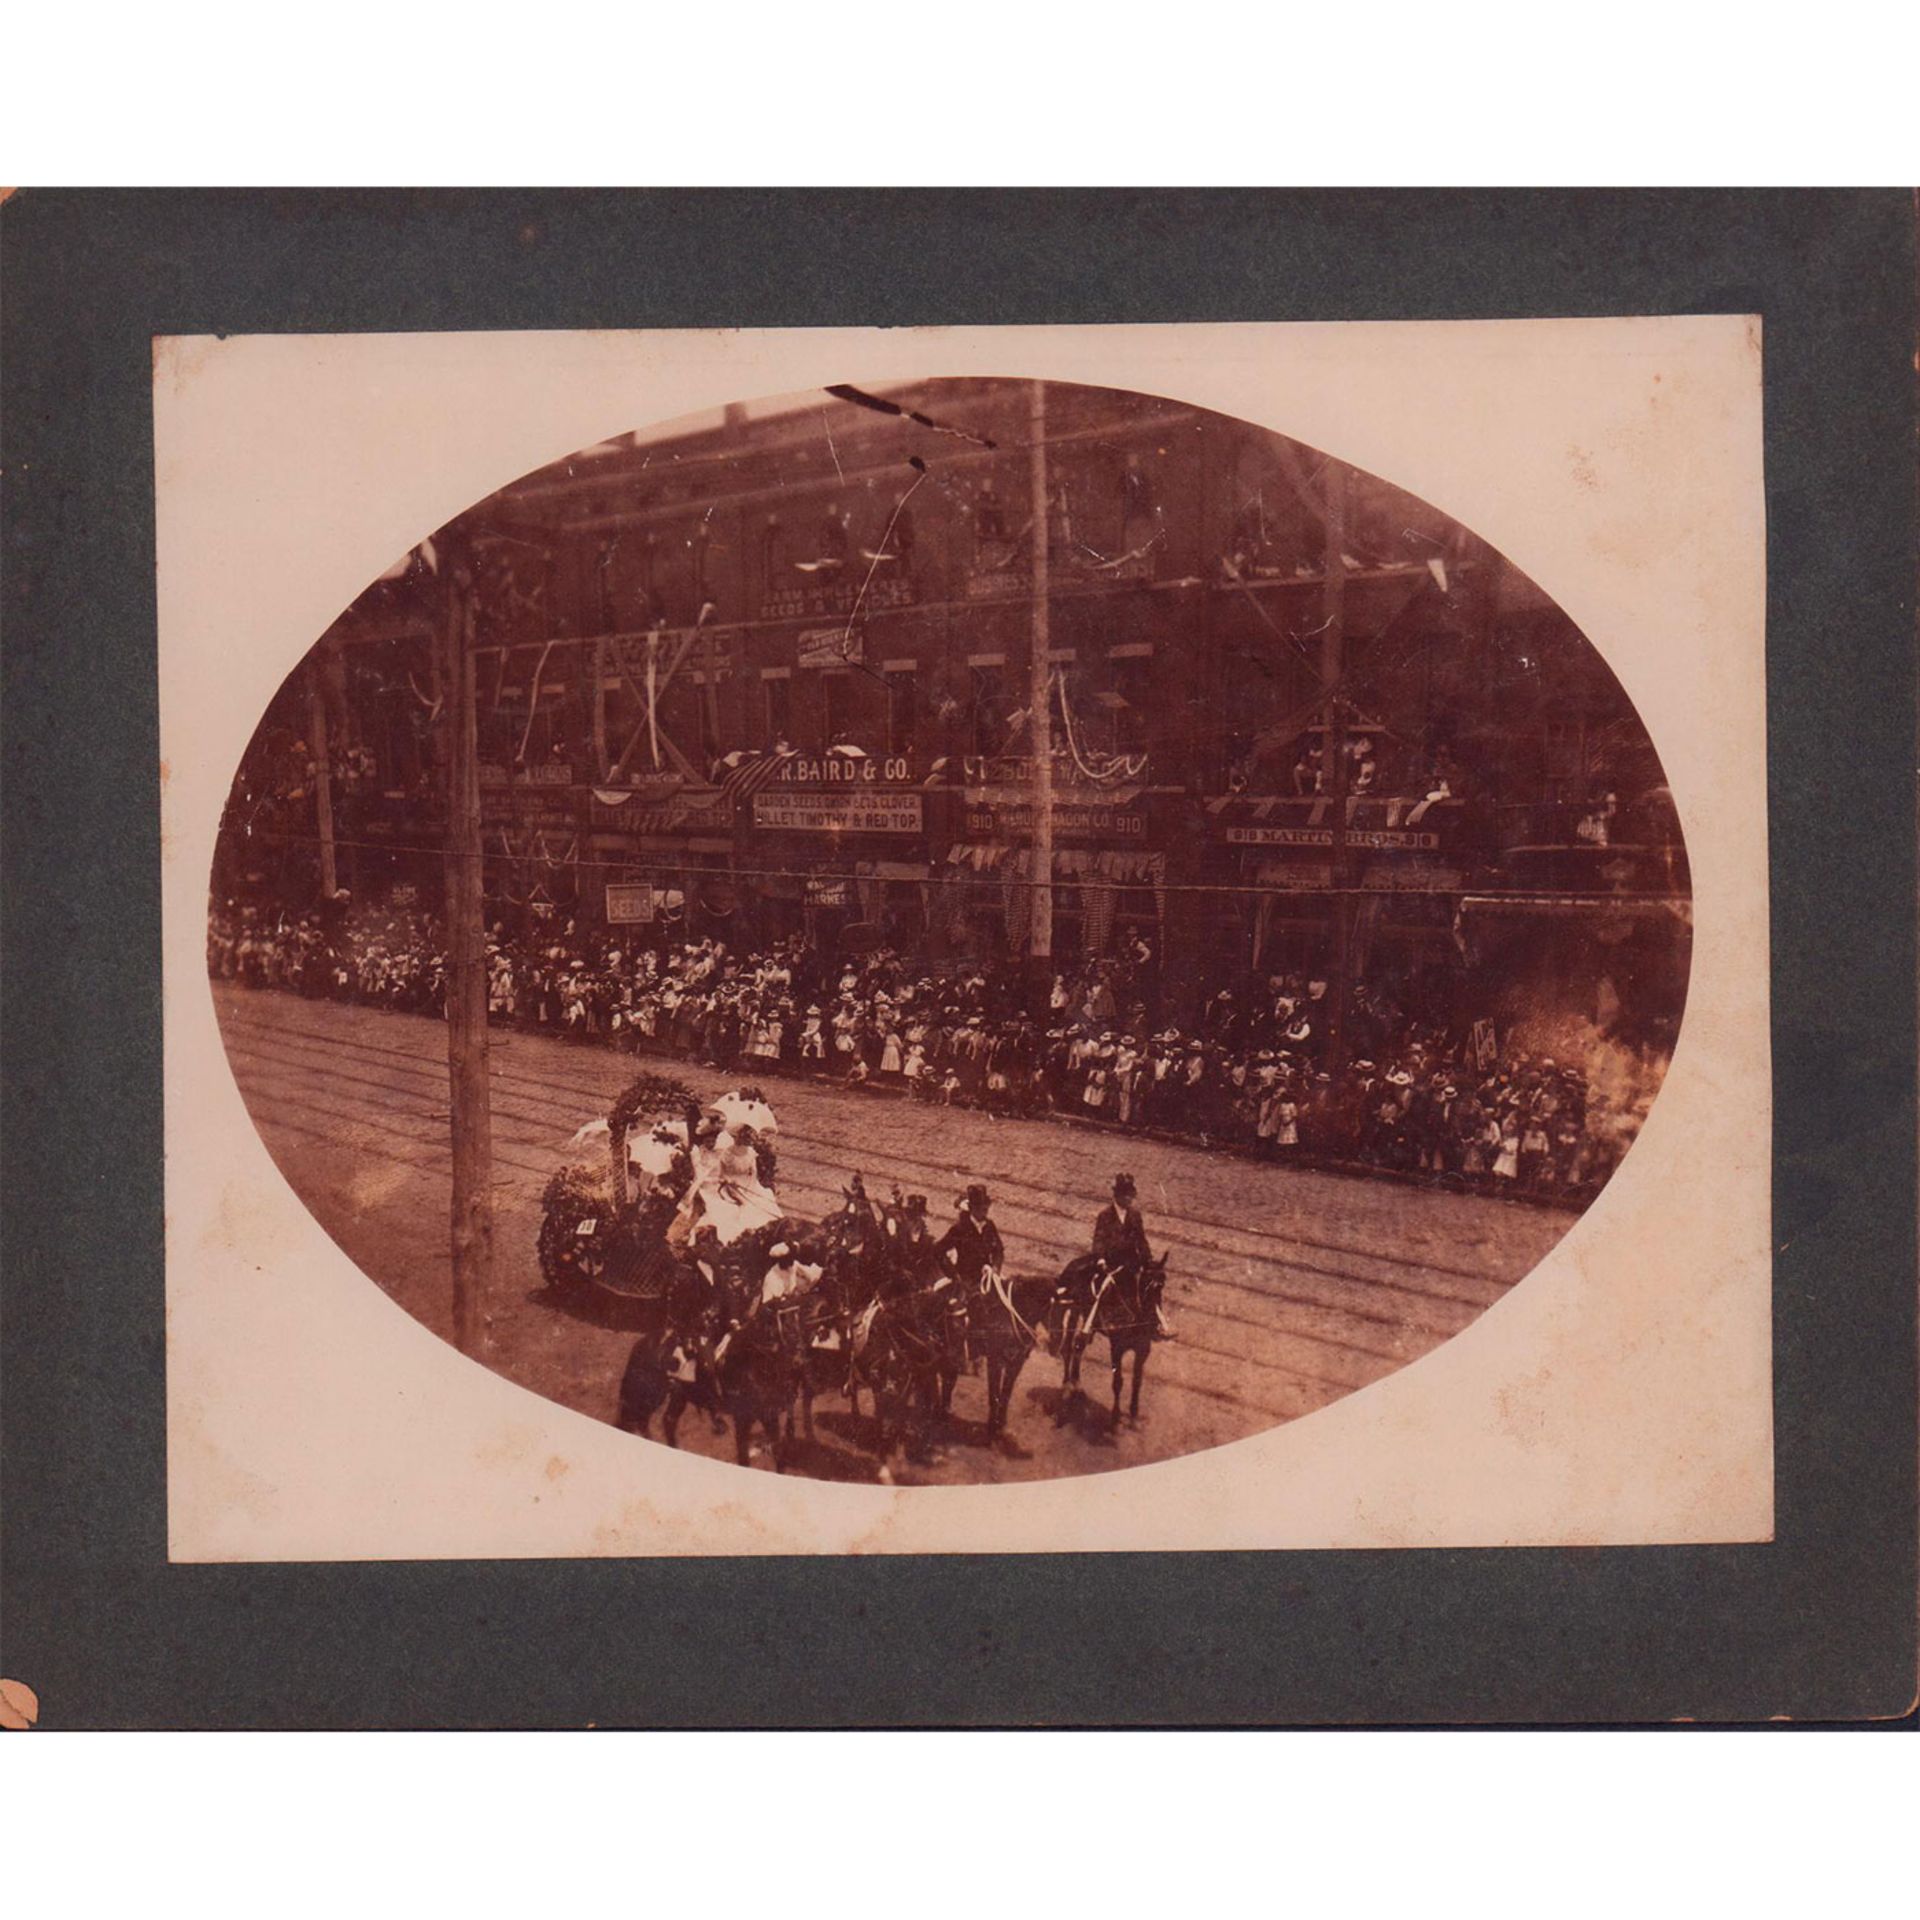 Vintage Black and White Photograph on Board, Parade